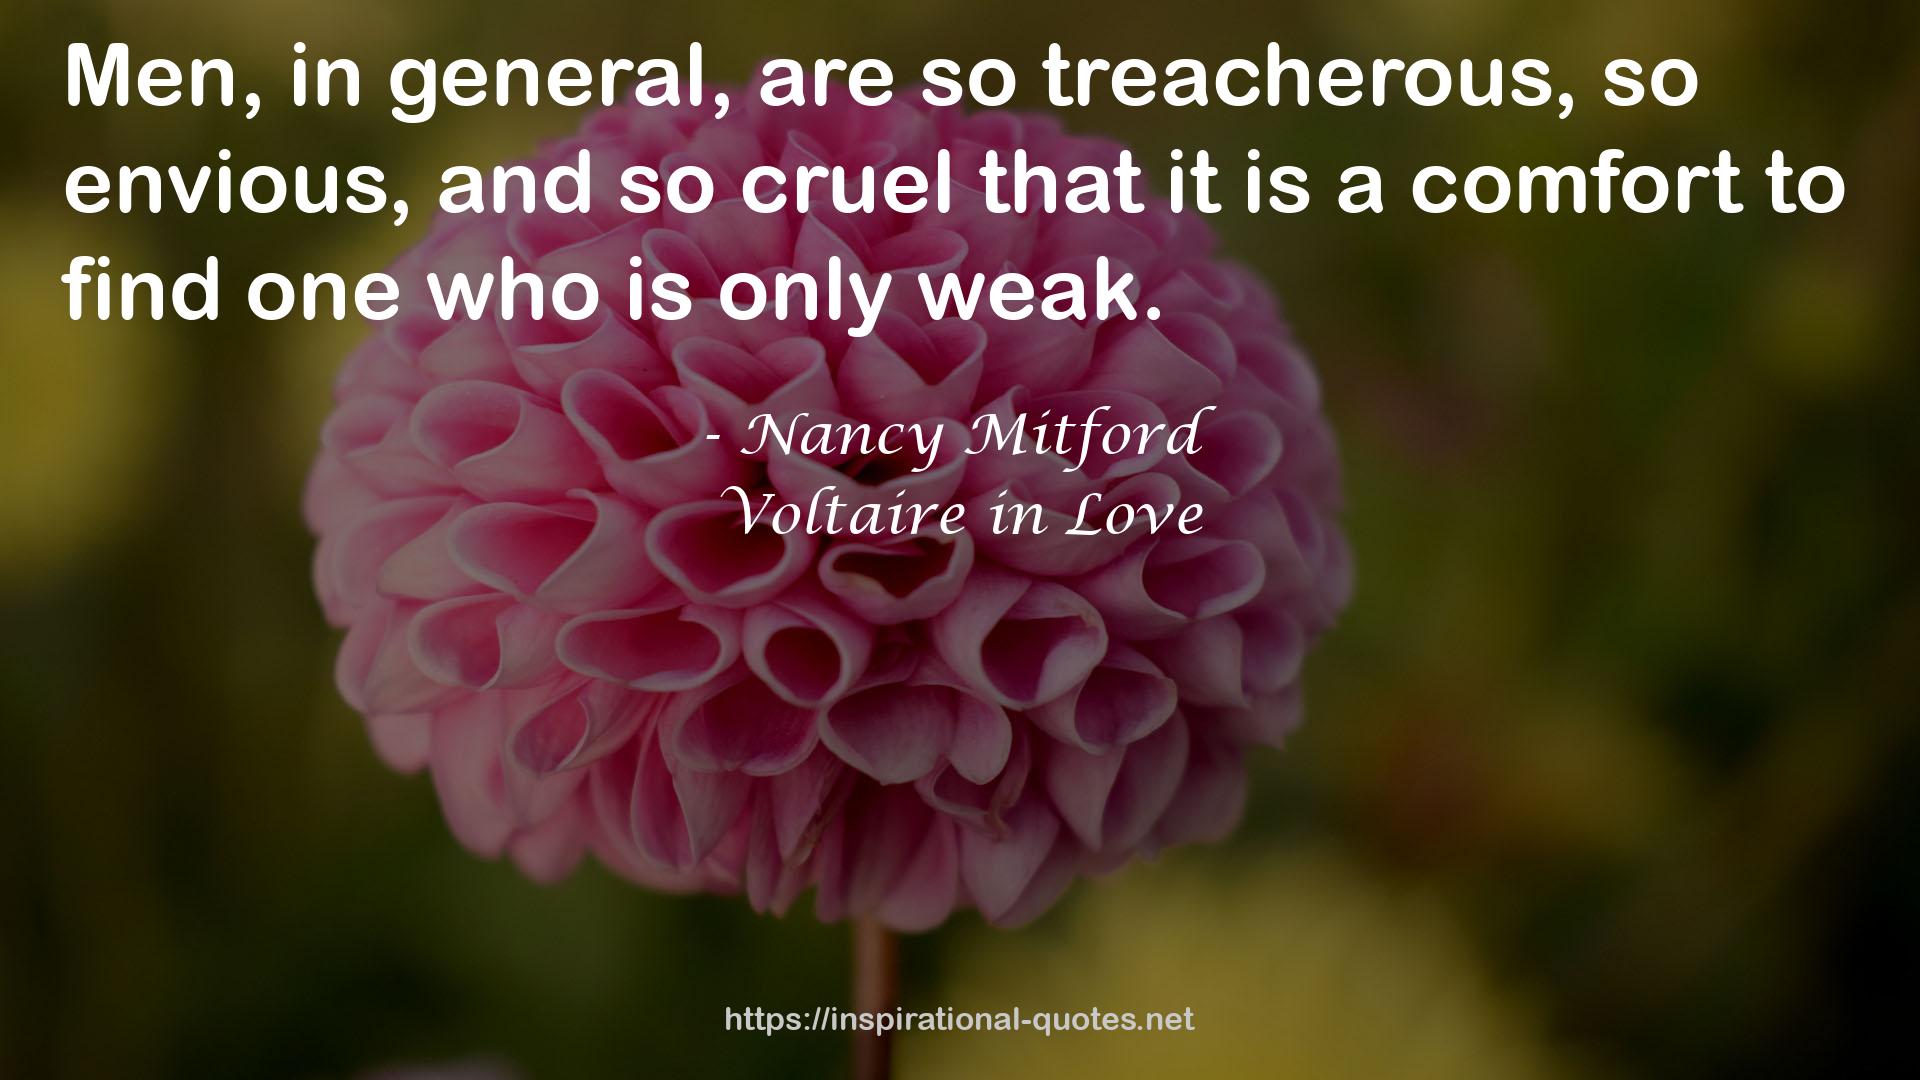 Voltaire in Love QUOTES